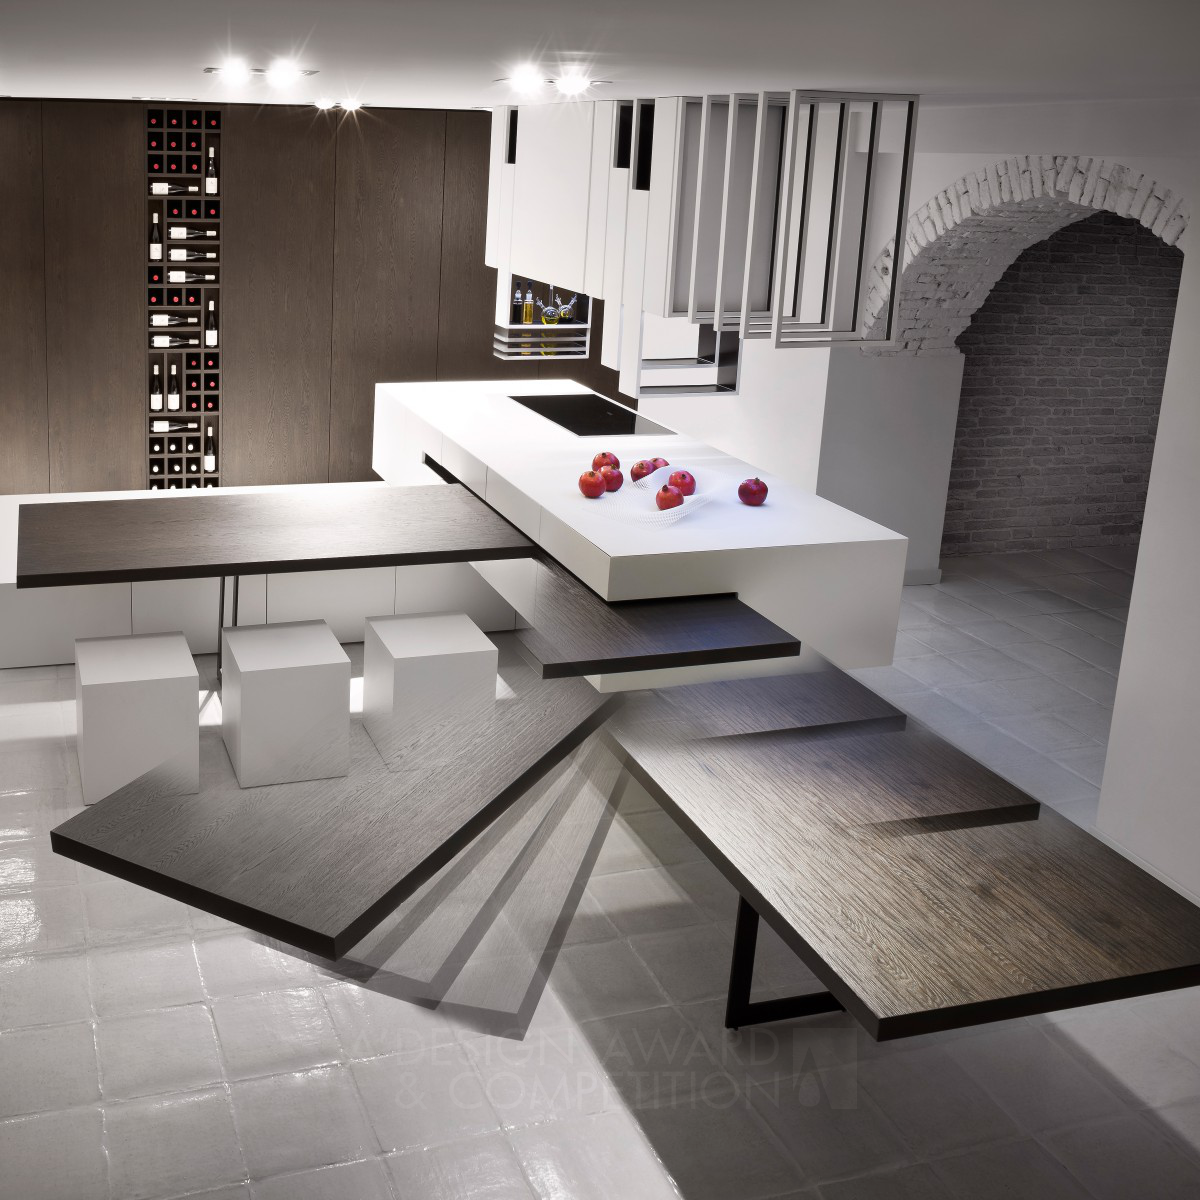 The Cut Kitchen by Alessandro Isola